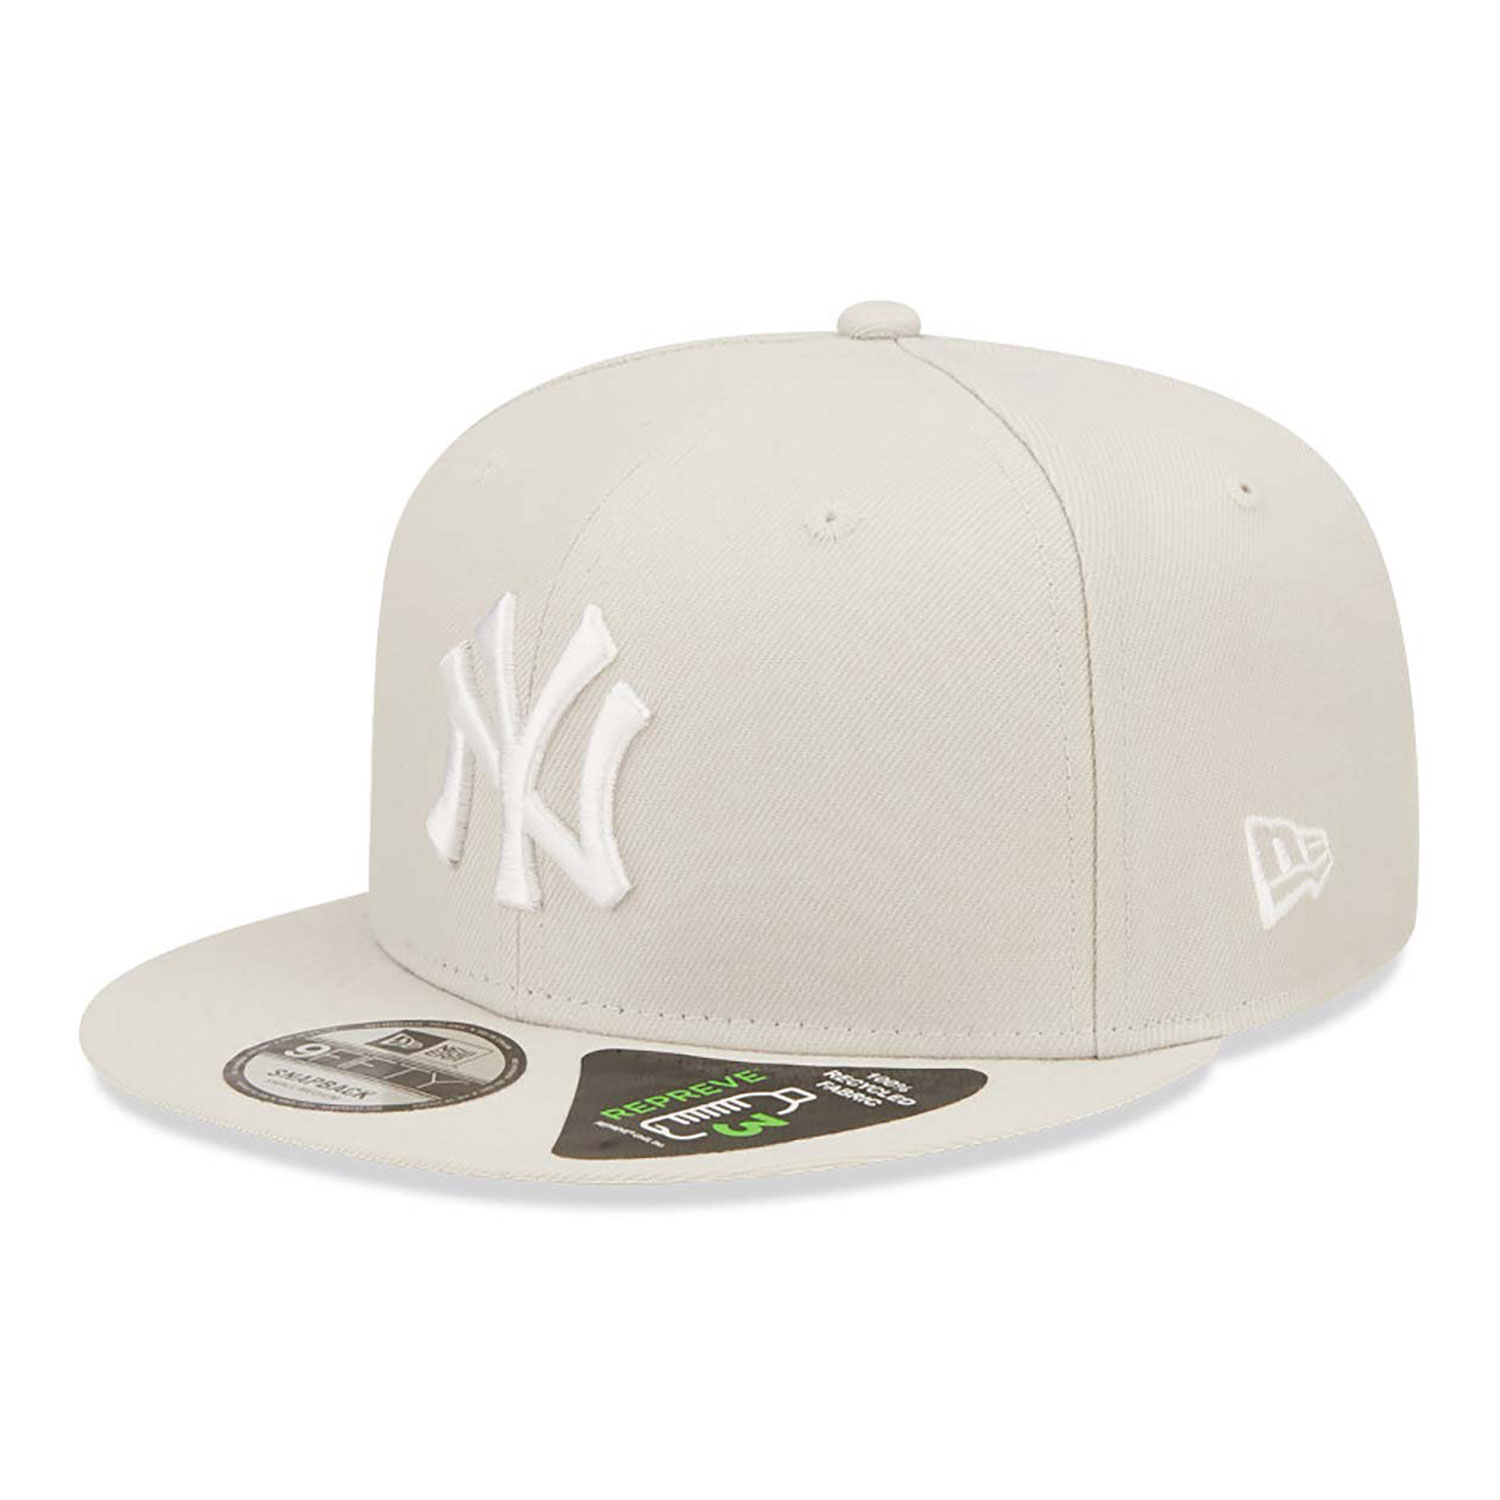 Casquette 9FIFTY Snapback New York Yankees Repreve Crème